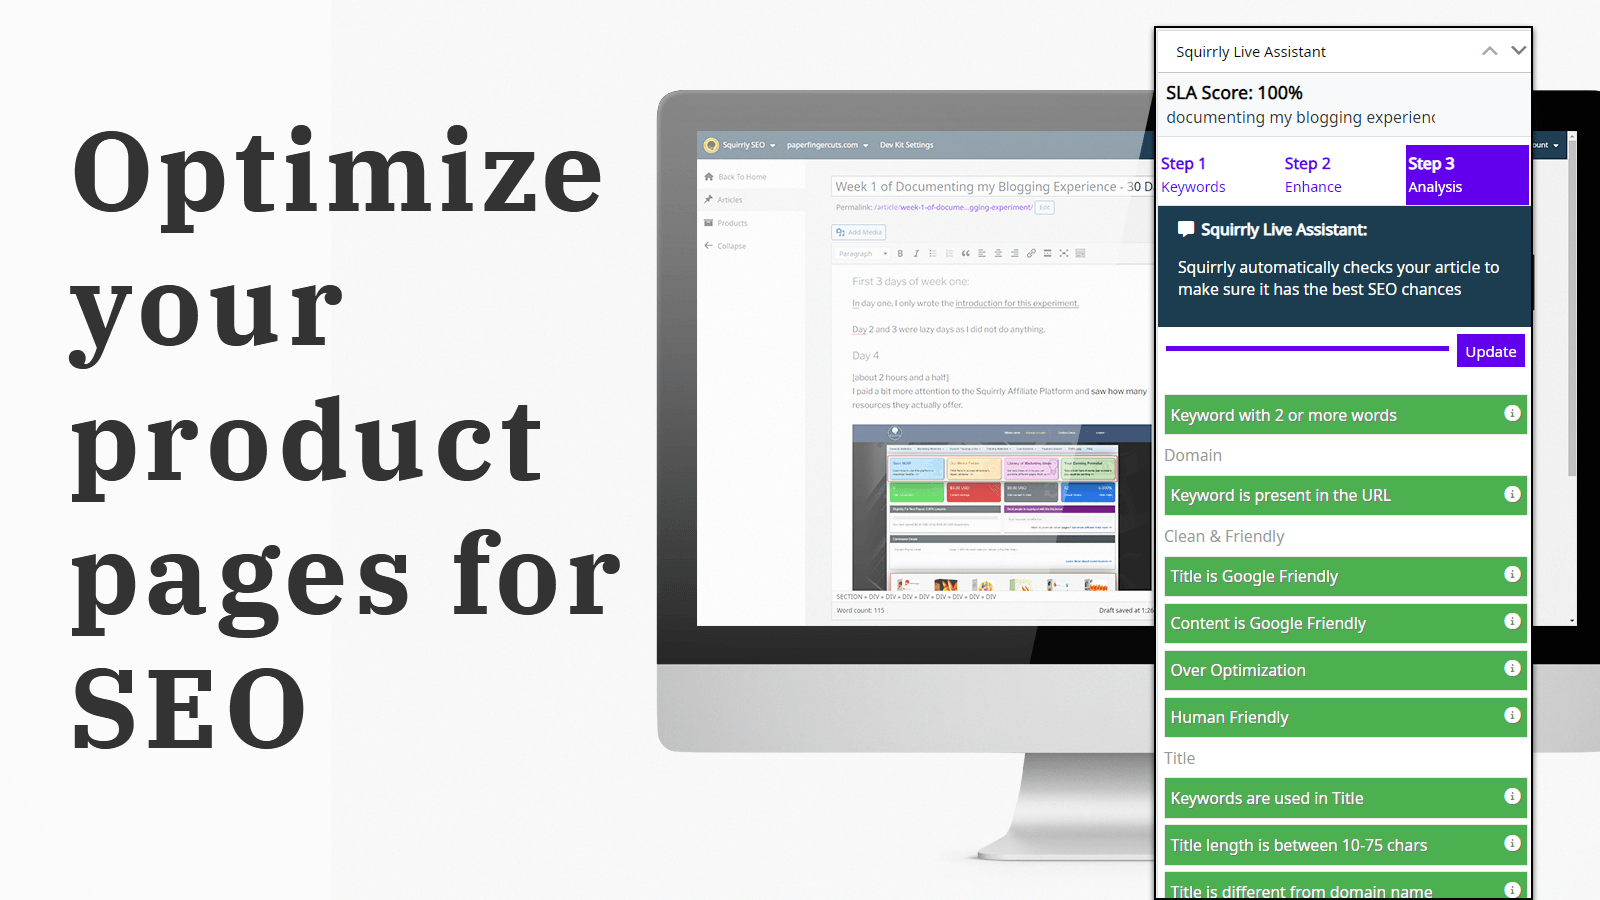 Optimize your product pages for SEO